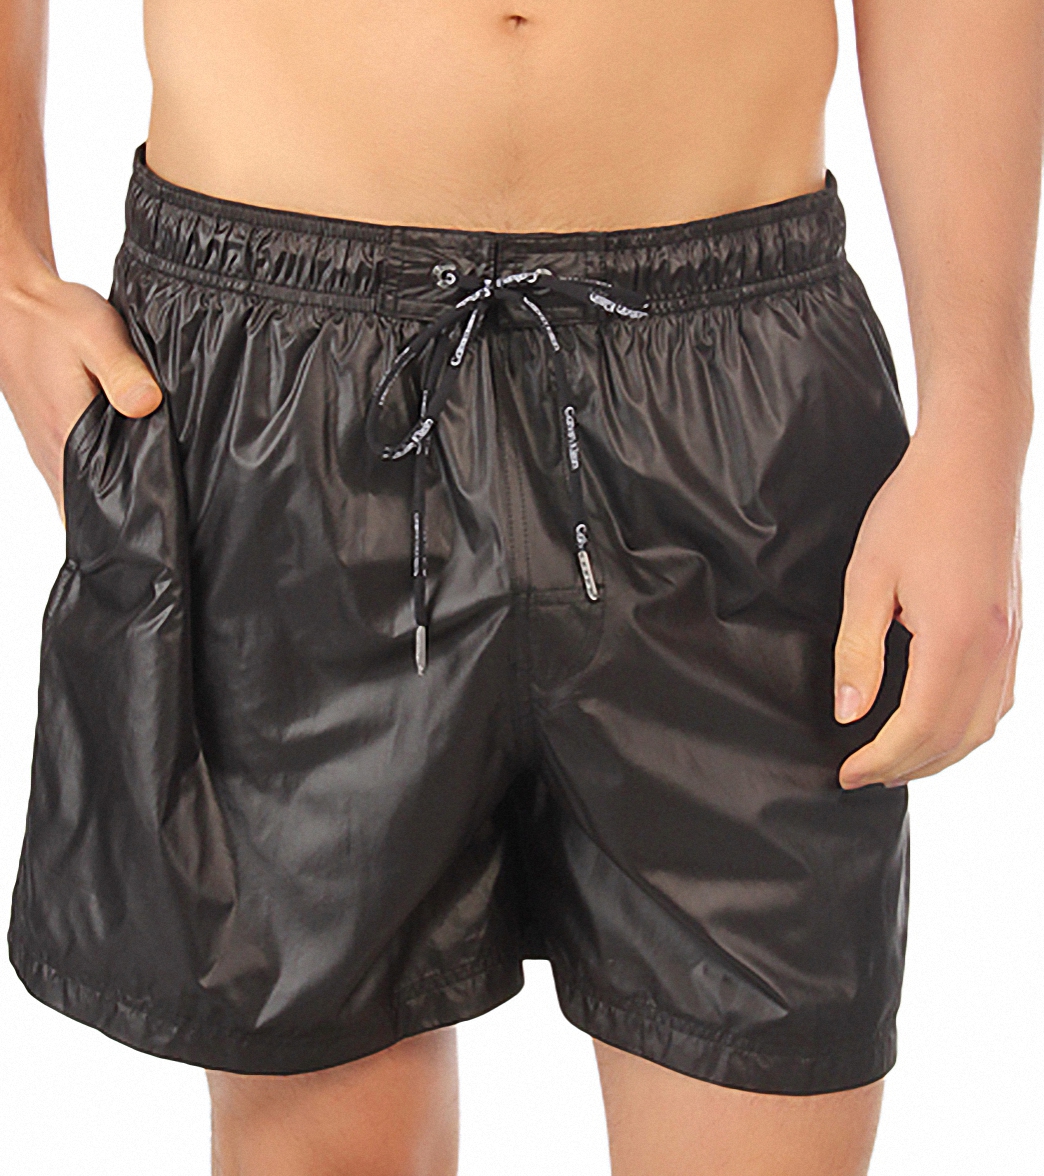 sports direct swimming trunks